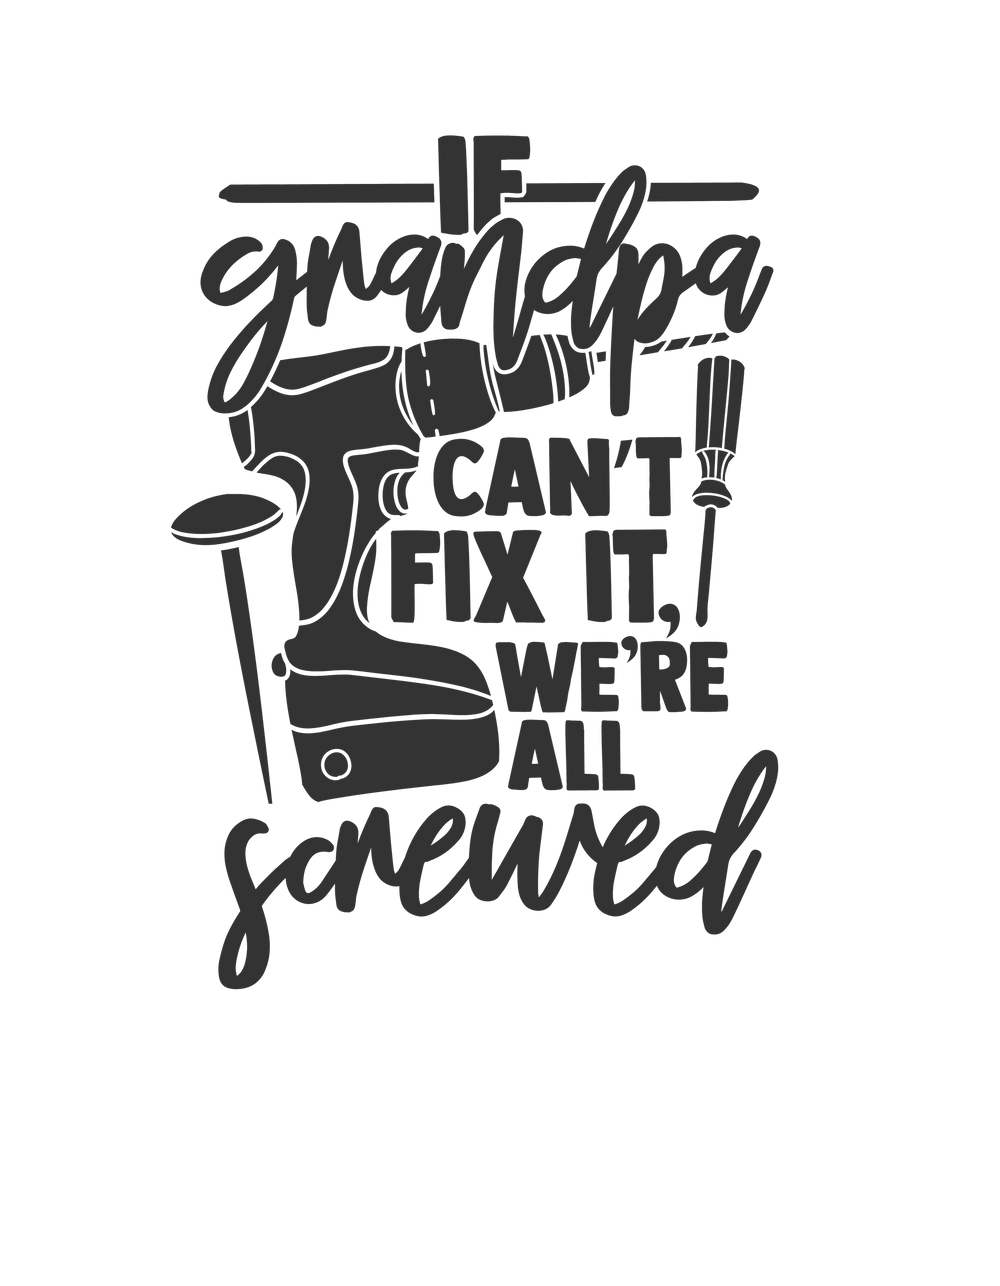 Black and white tee with drill and screwdriver graphic. Grandpa Can't Fix It We Are Screwed Tee. 100% ring-spun cotton, relaxed fit, durable double-needle stitching, no side-seams for tubular shape.